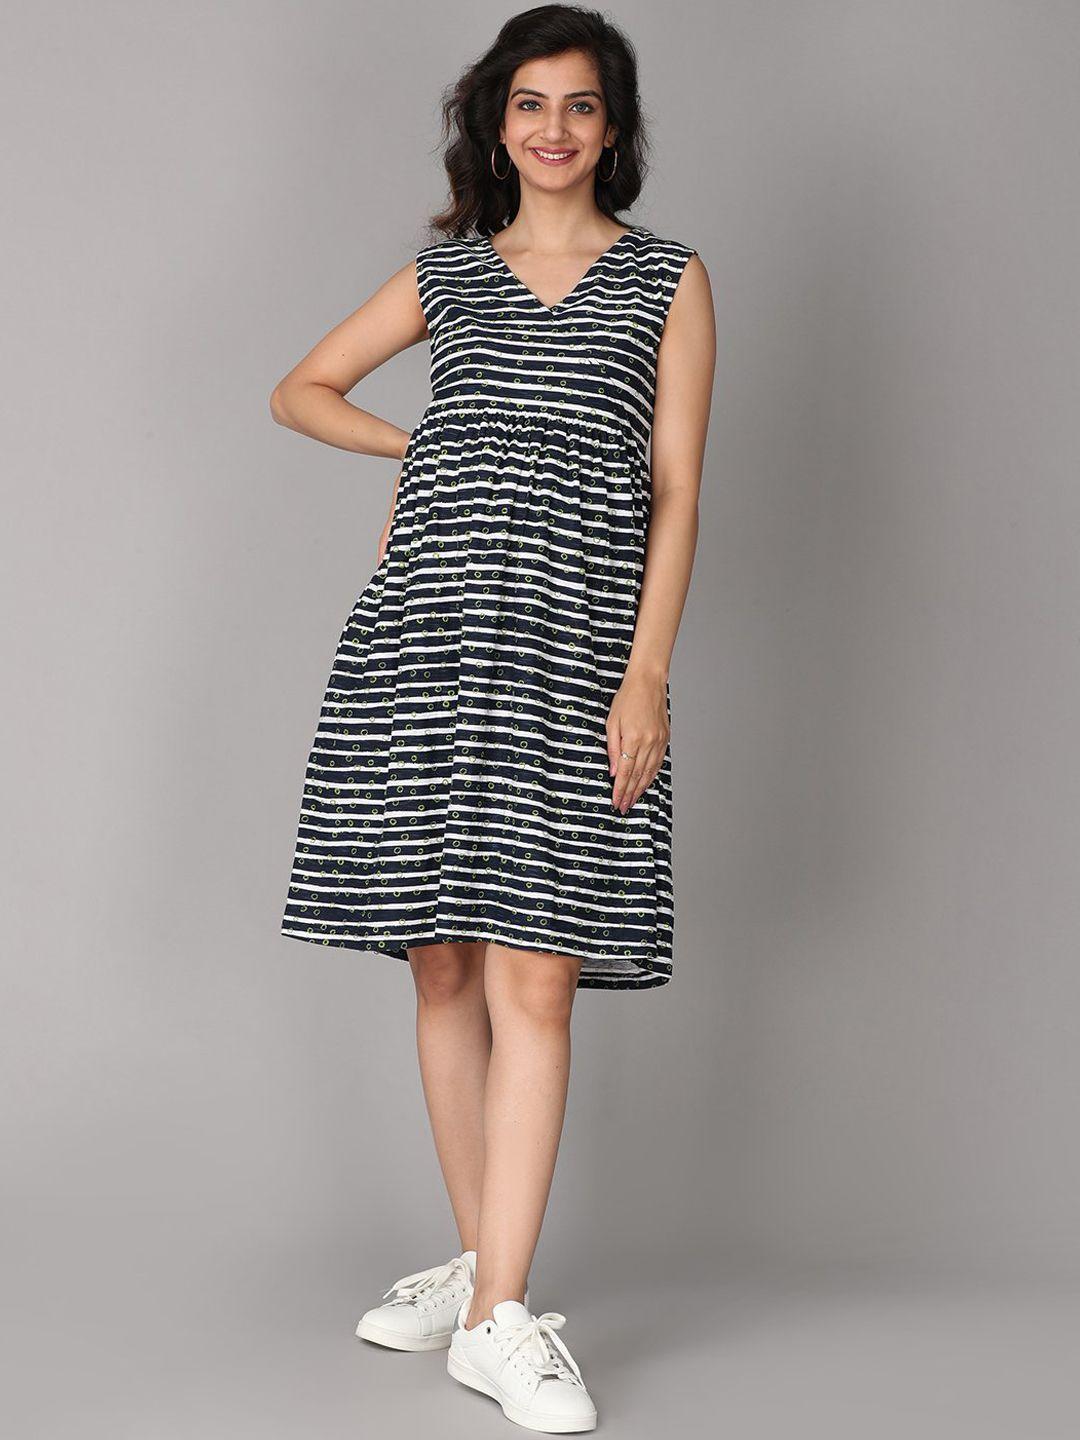 the mom store maternity navy blue striped dress